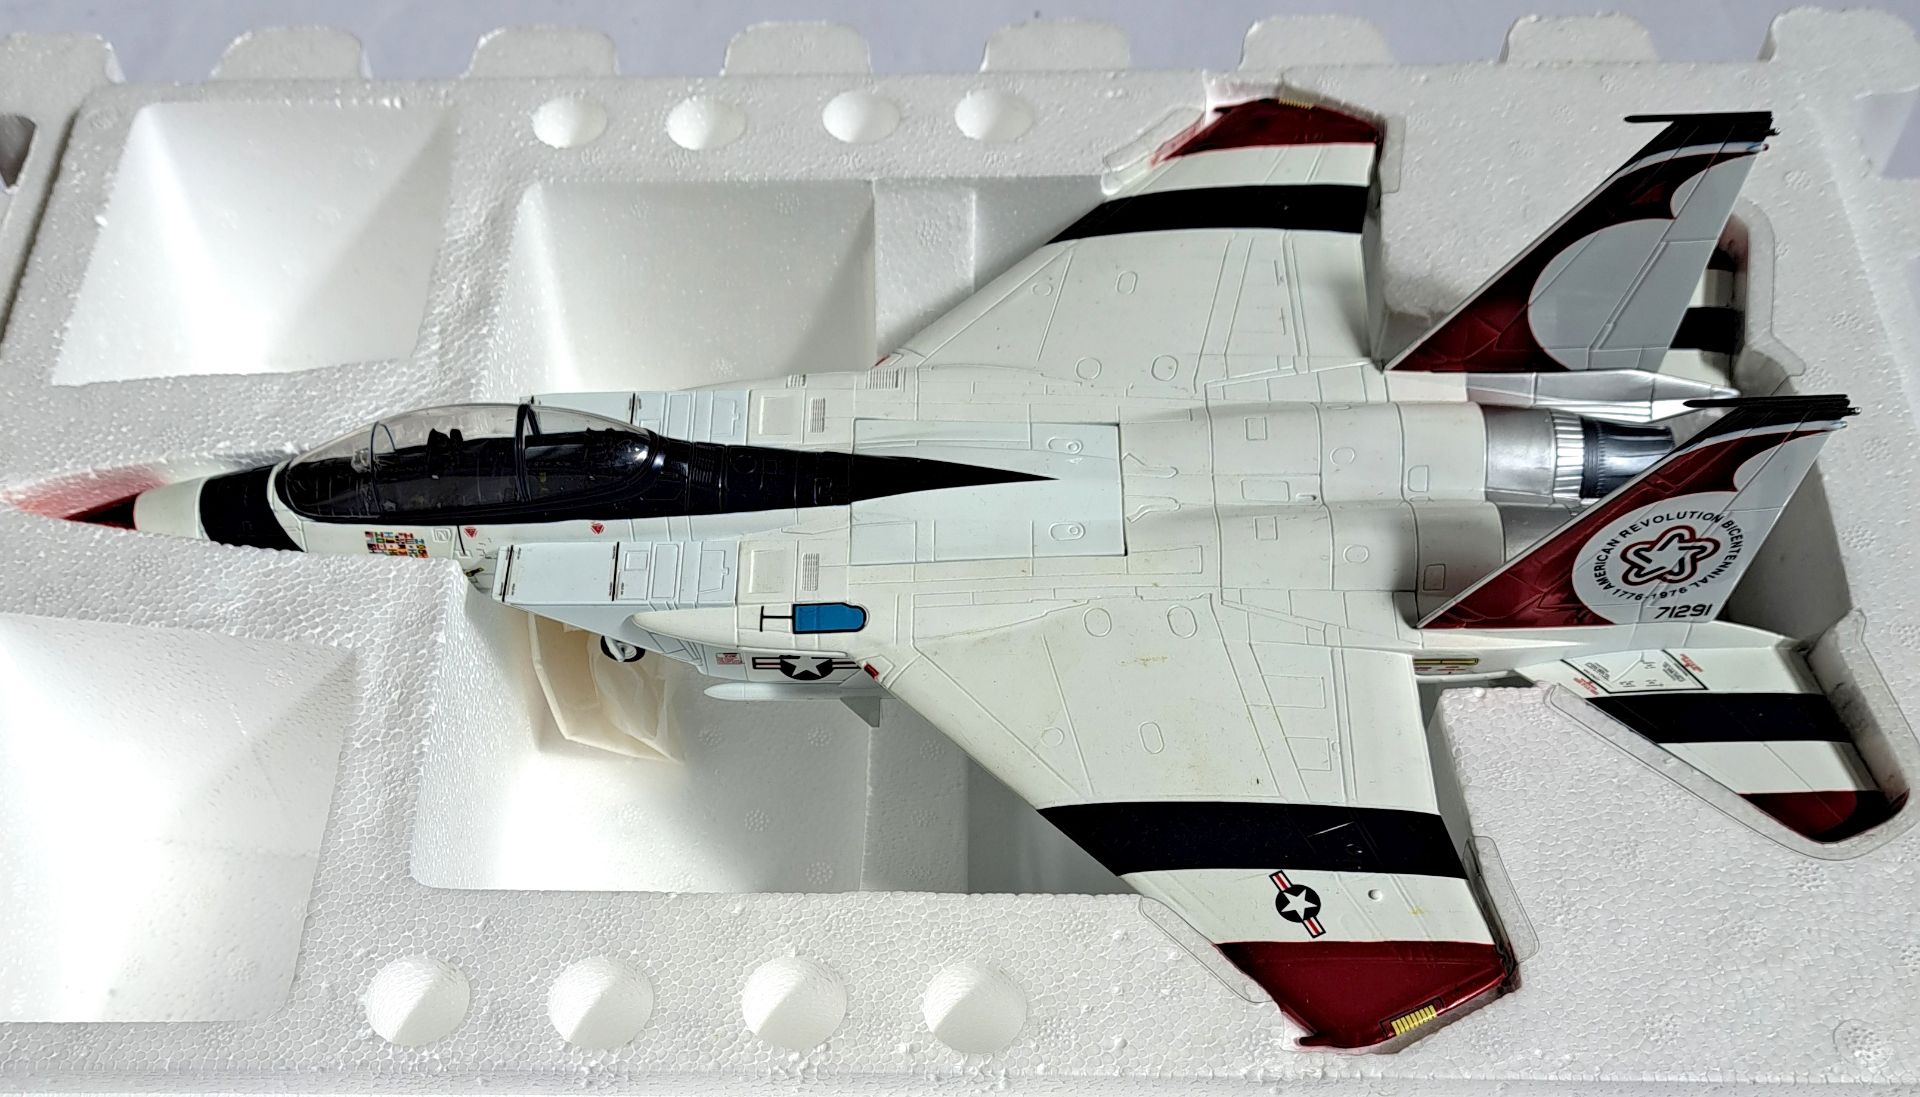 Franklin Mint "Armour Collection", a boxed 1:48 scale military aircraft ART.98047 - Image 3 of 3